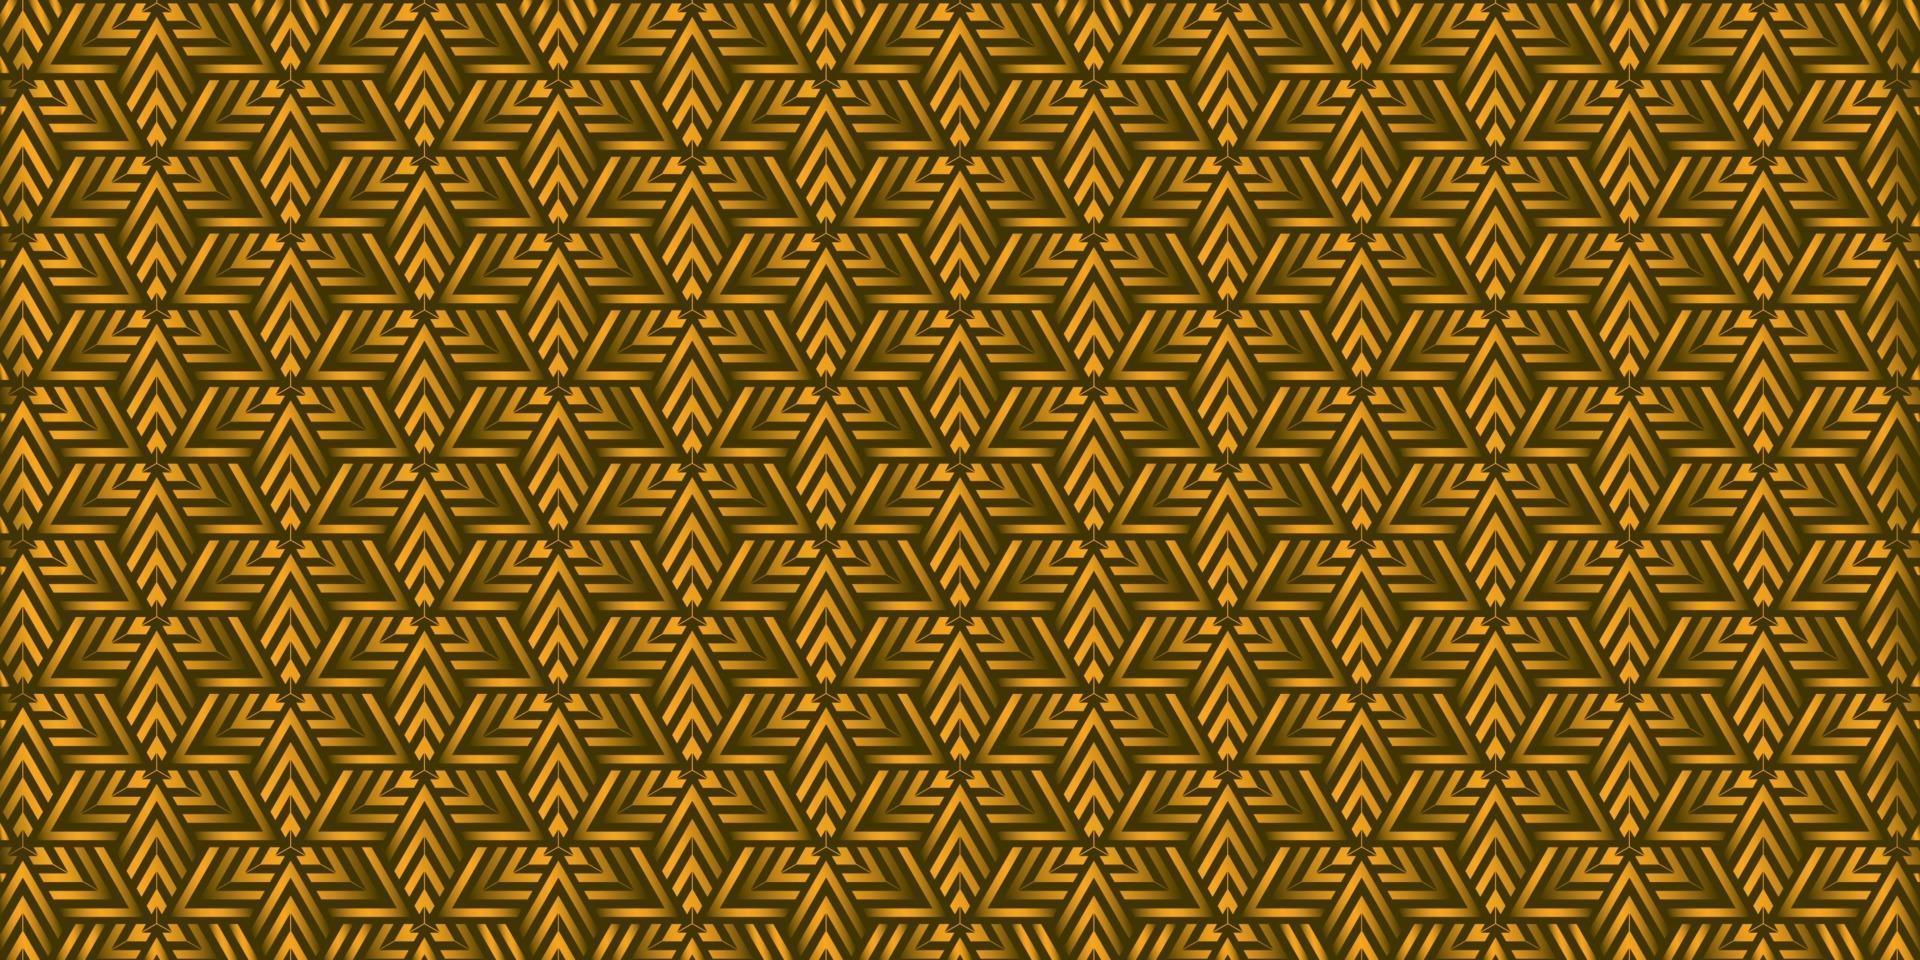 Geometric design modern pattern with stripes triangles shape vector